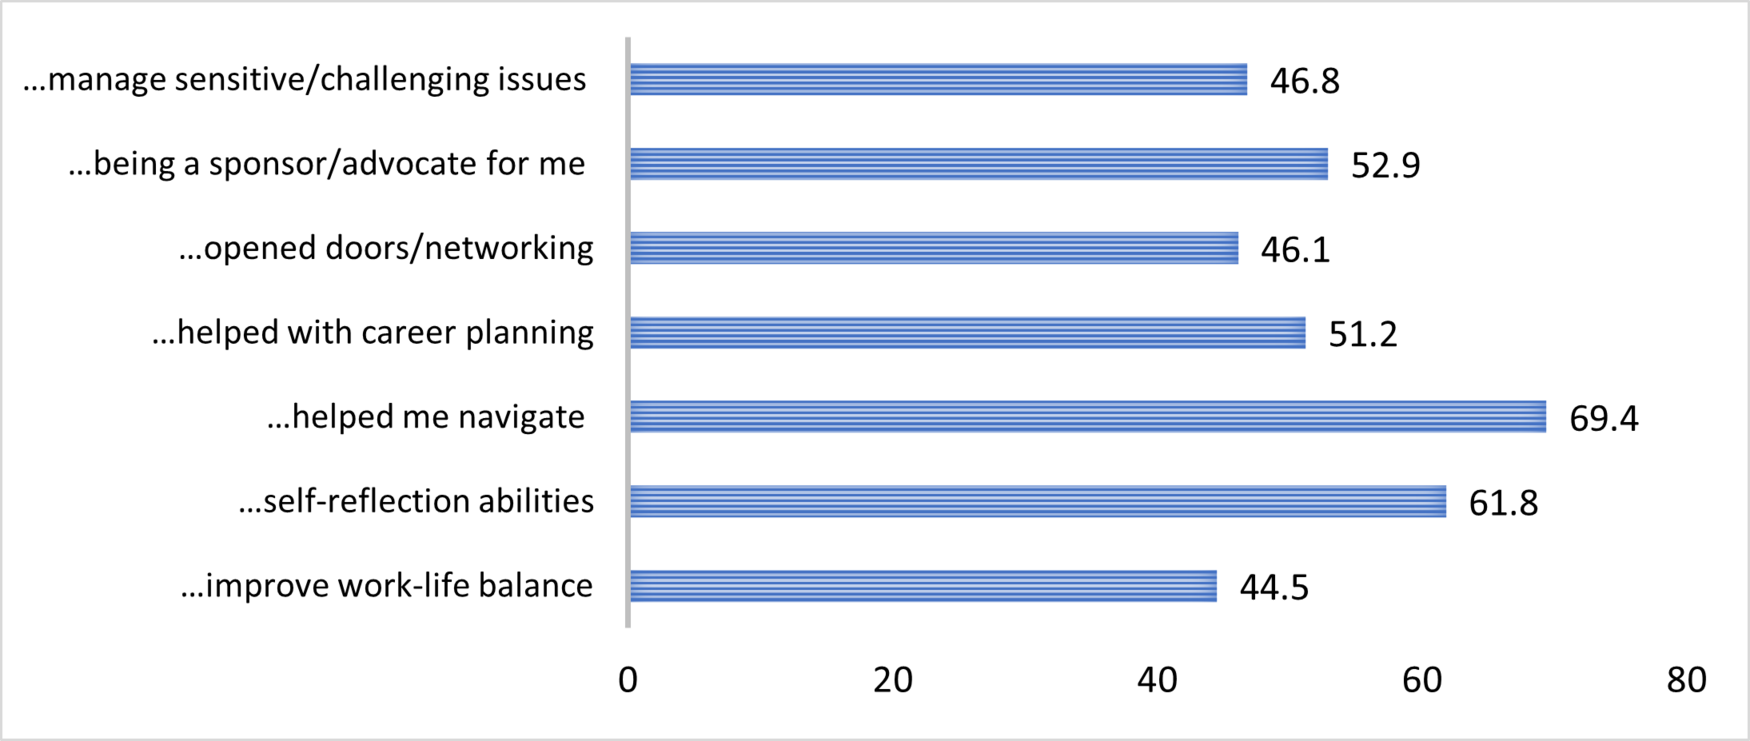 Figure 1 shows Proportion that somewhat or strongly agreed that their mentor(s) helped them with various objectives.